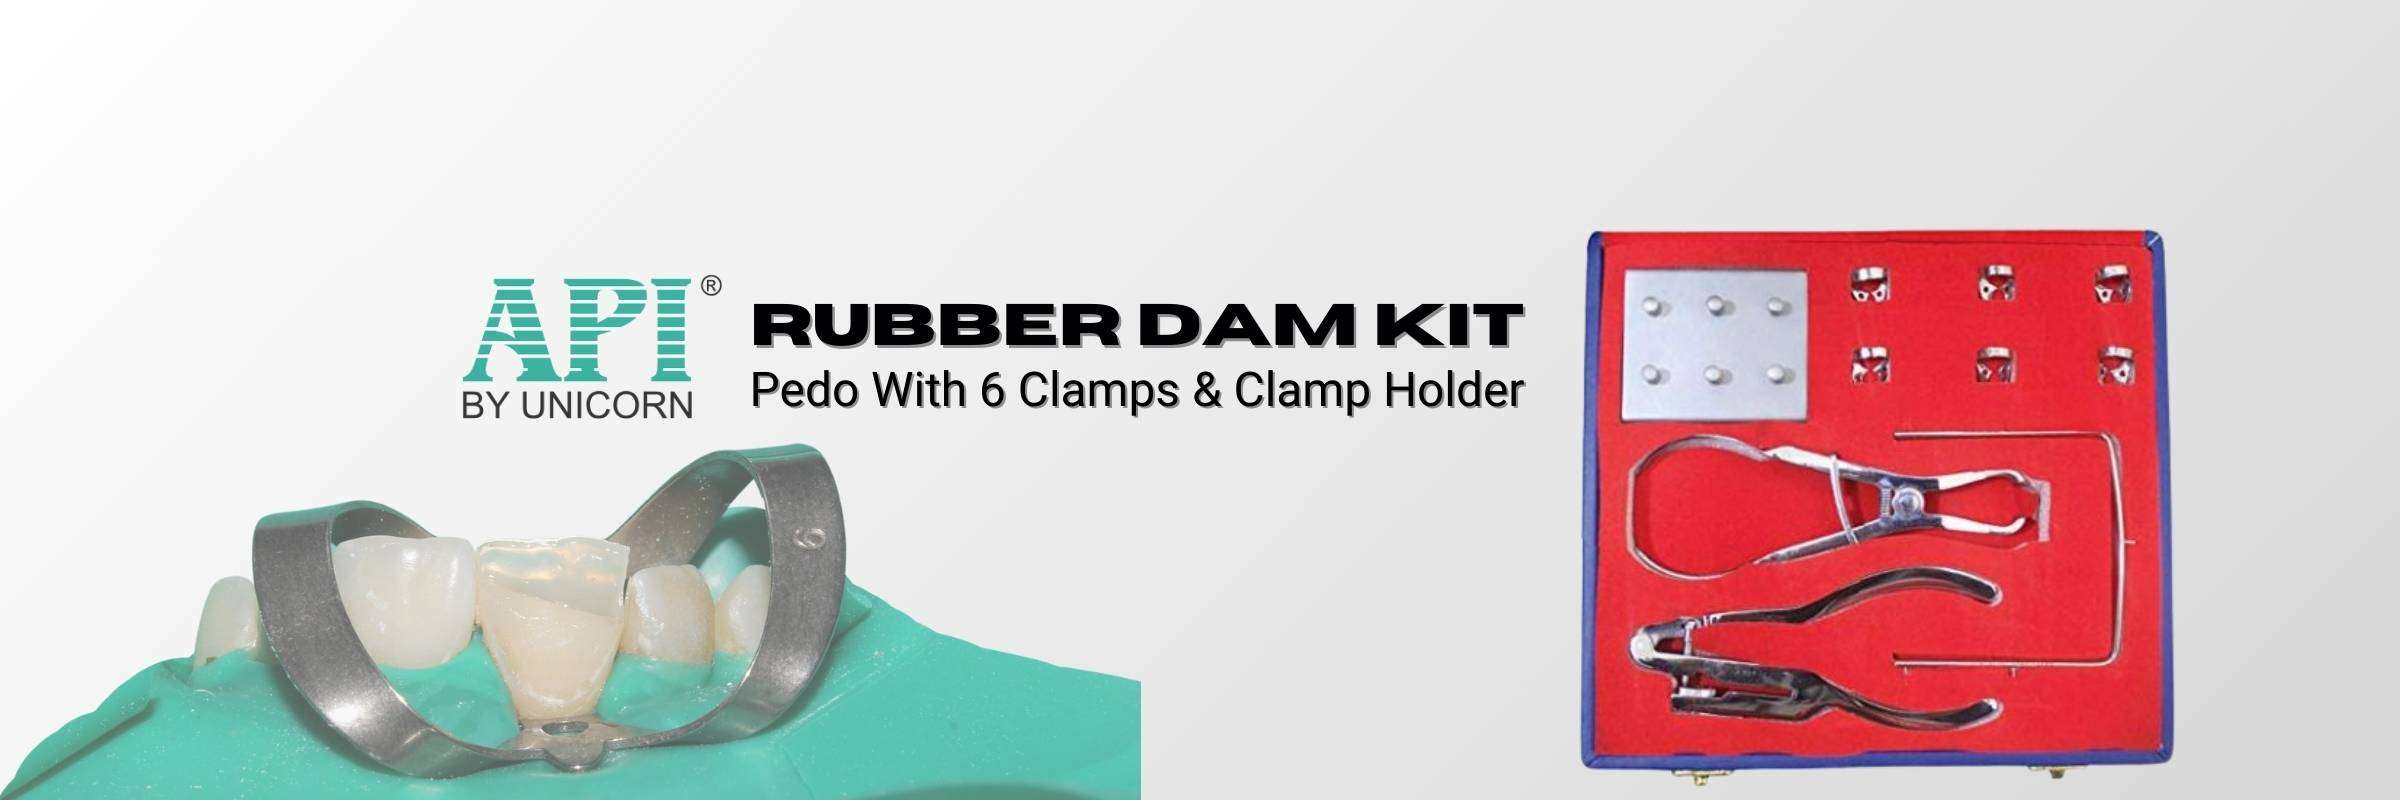 Rubber Dam Kit – Paedo With 6 Clamps & Clamp Holder